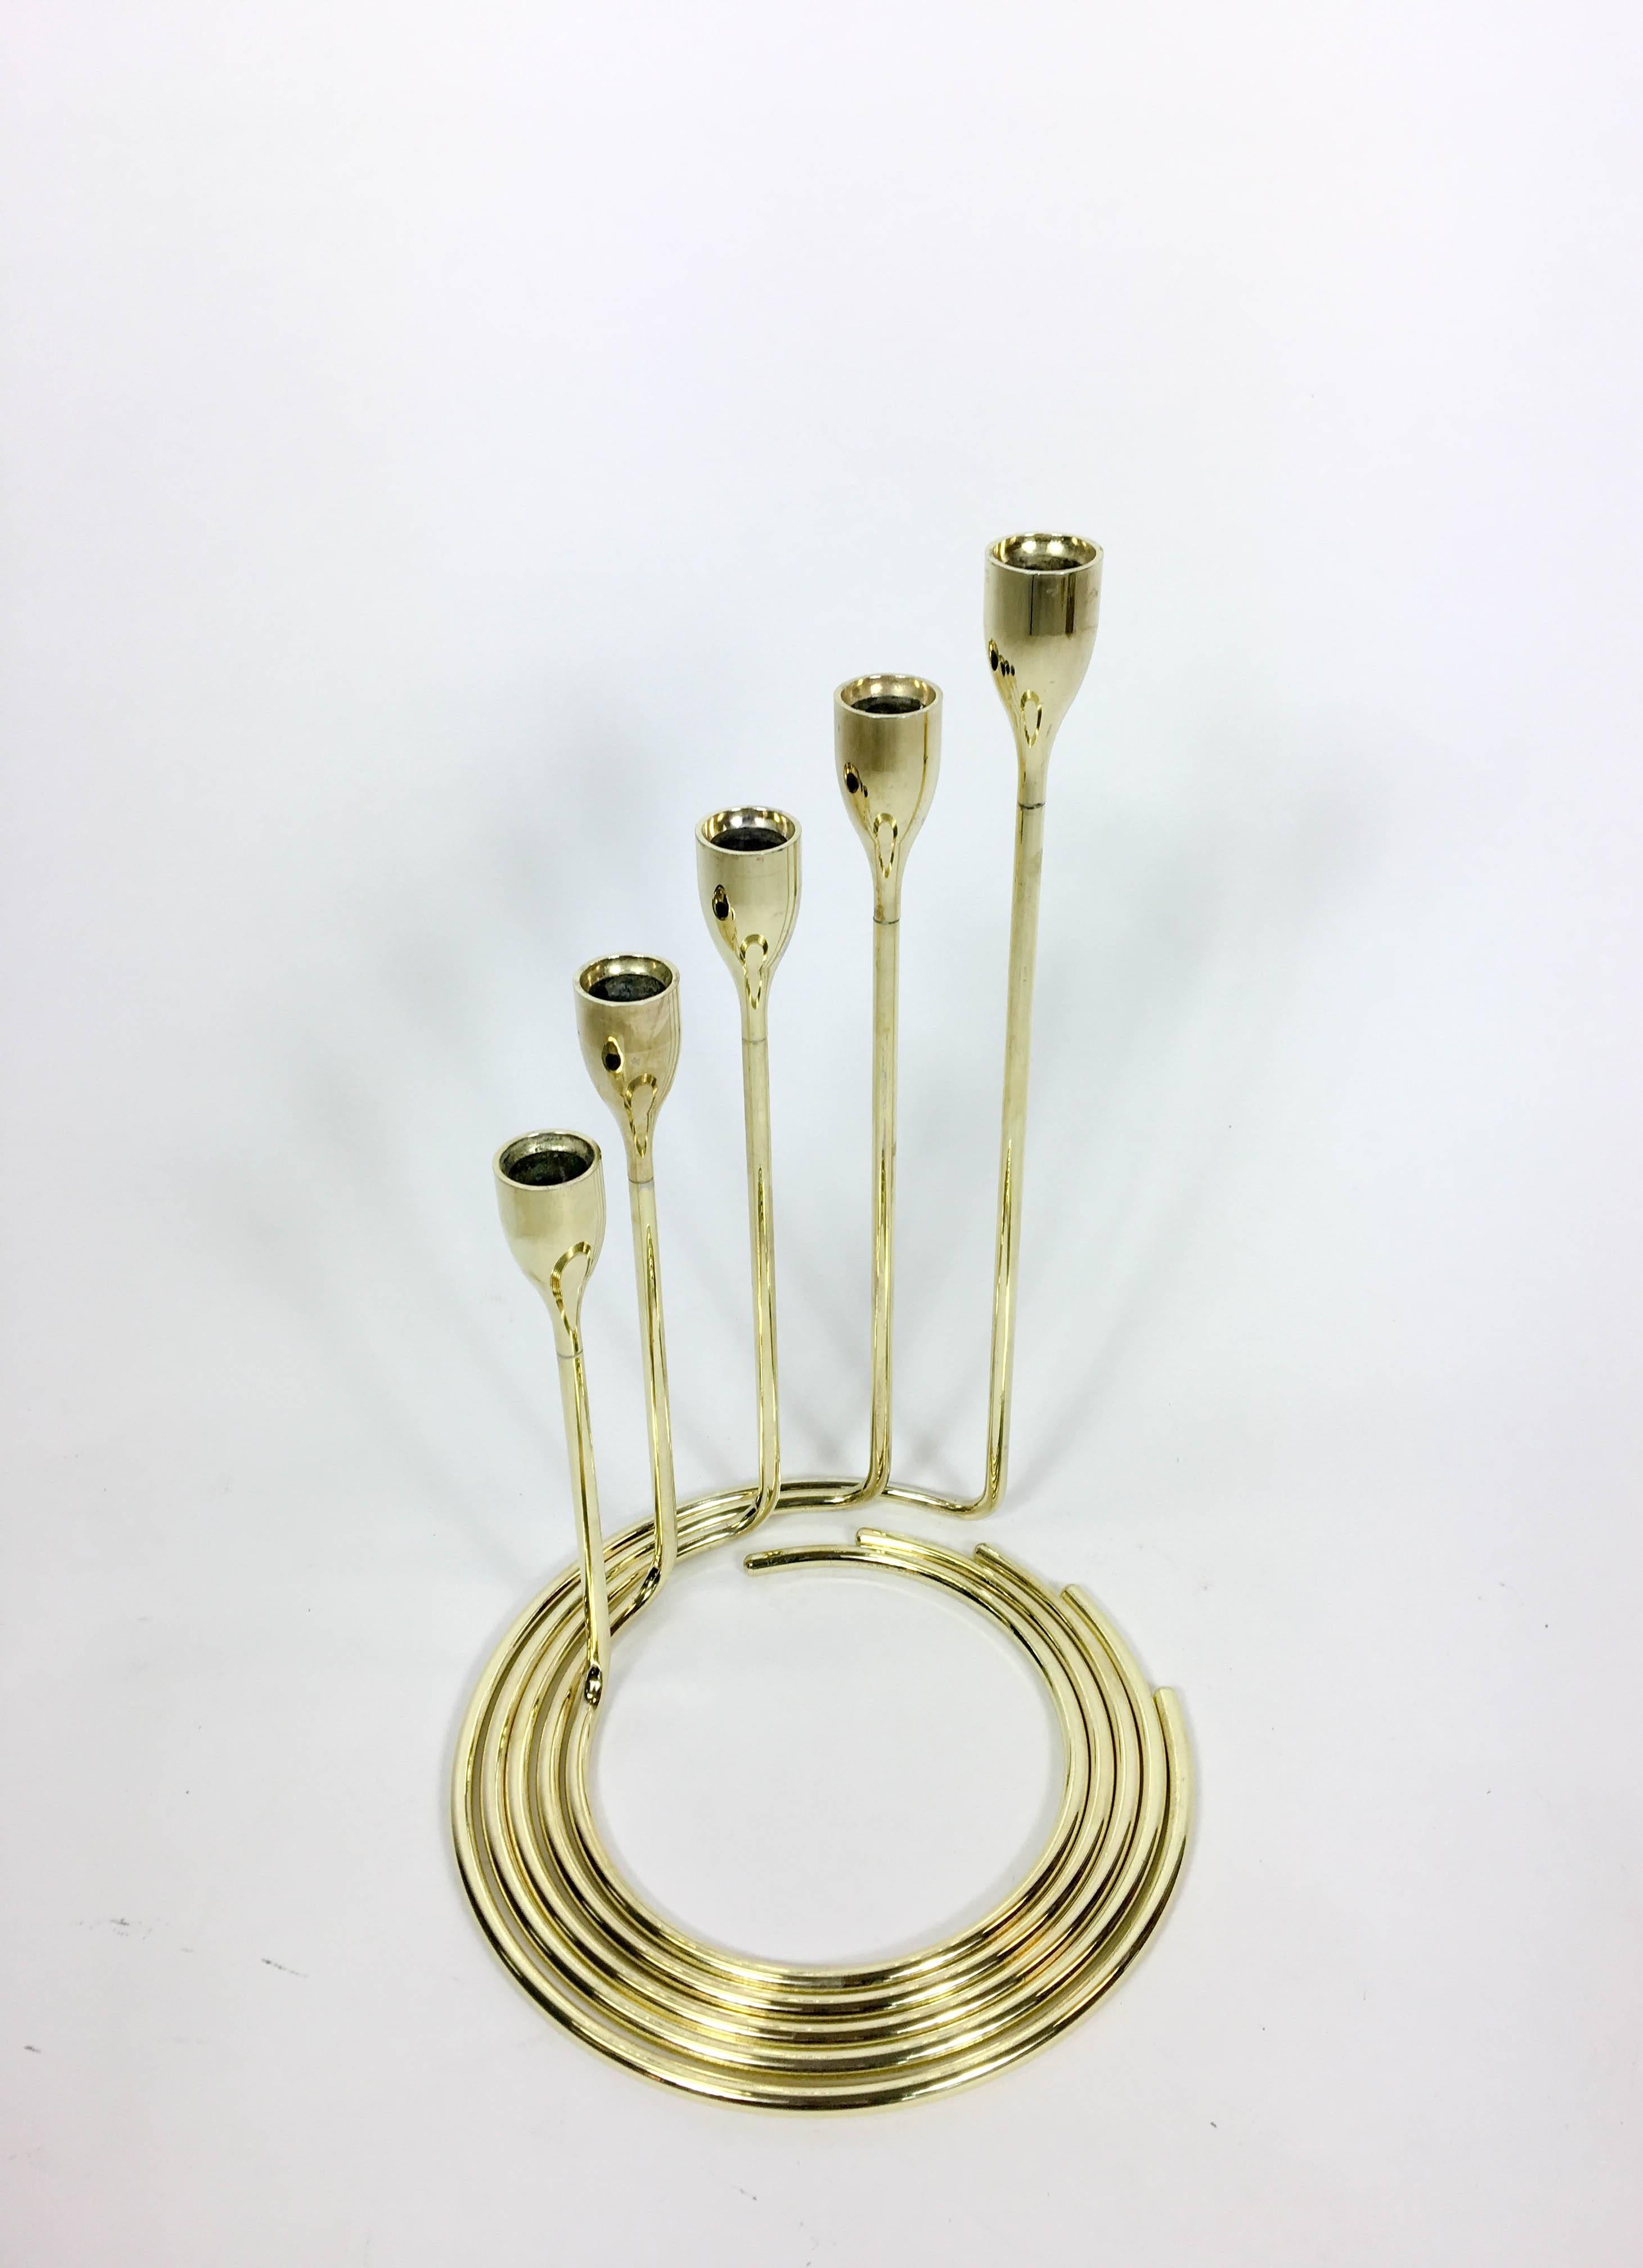 Danish spiral candelabra set. Five separate candlesticks holders with spiral bases that fit neatly together to form a spiral candelabra. Solid brass, 1960s.